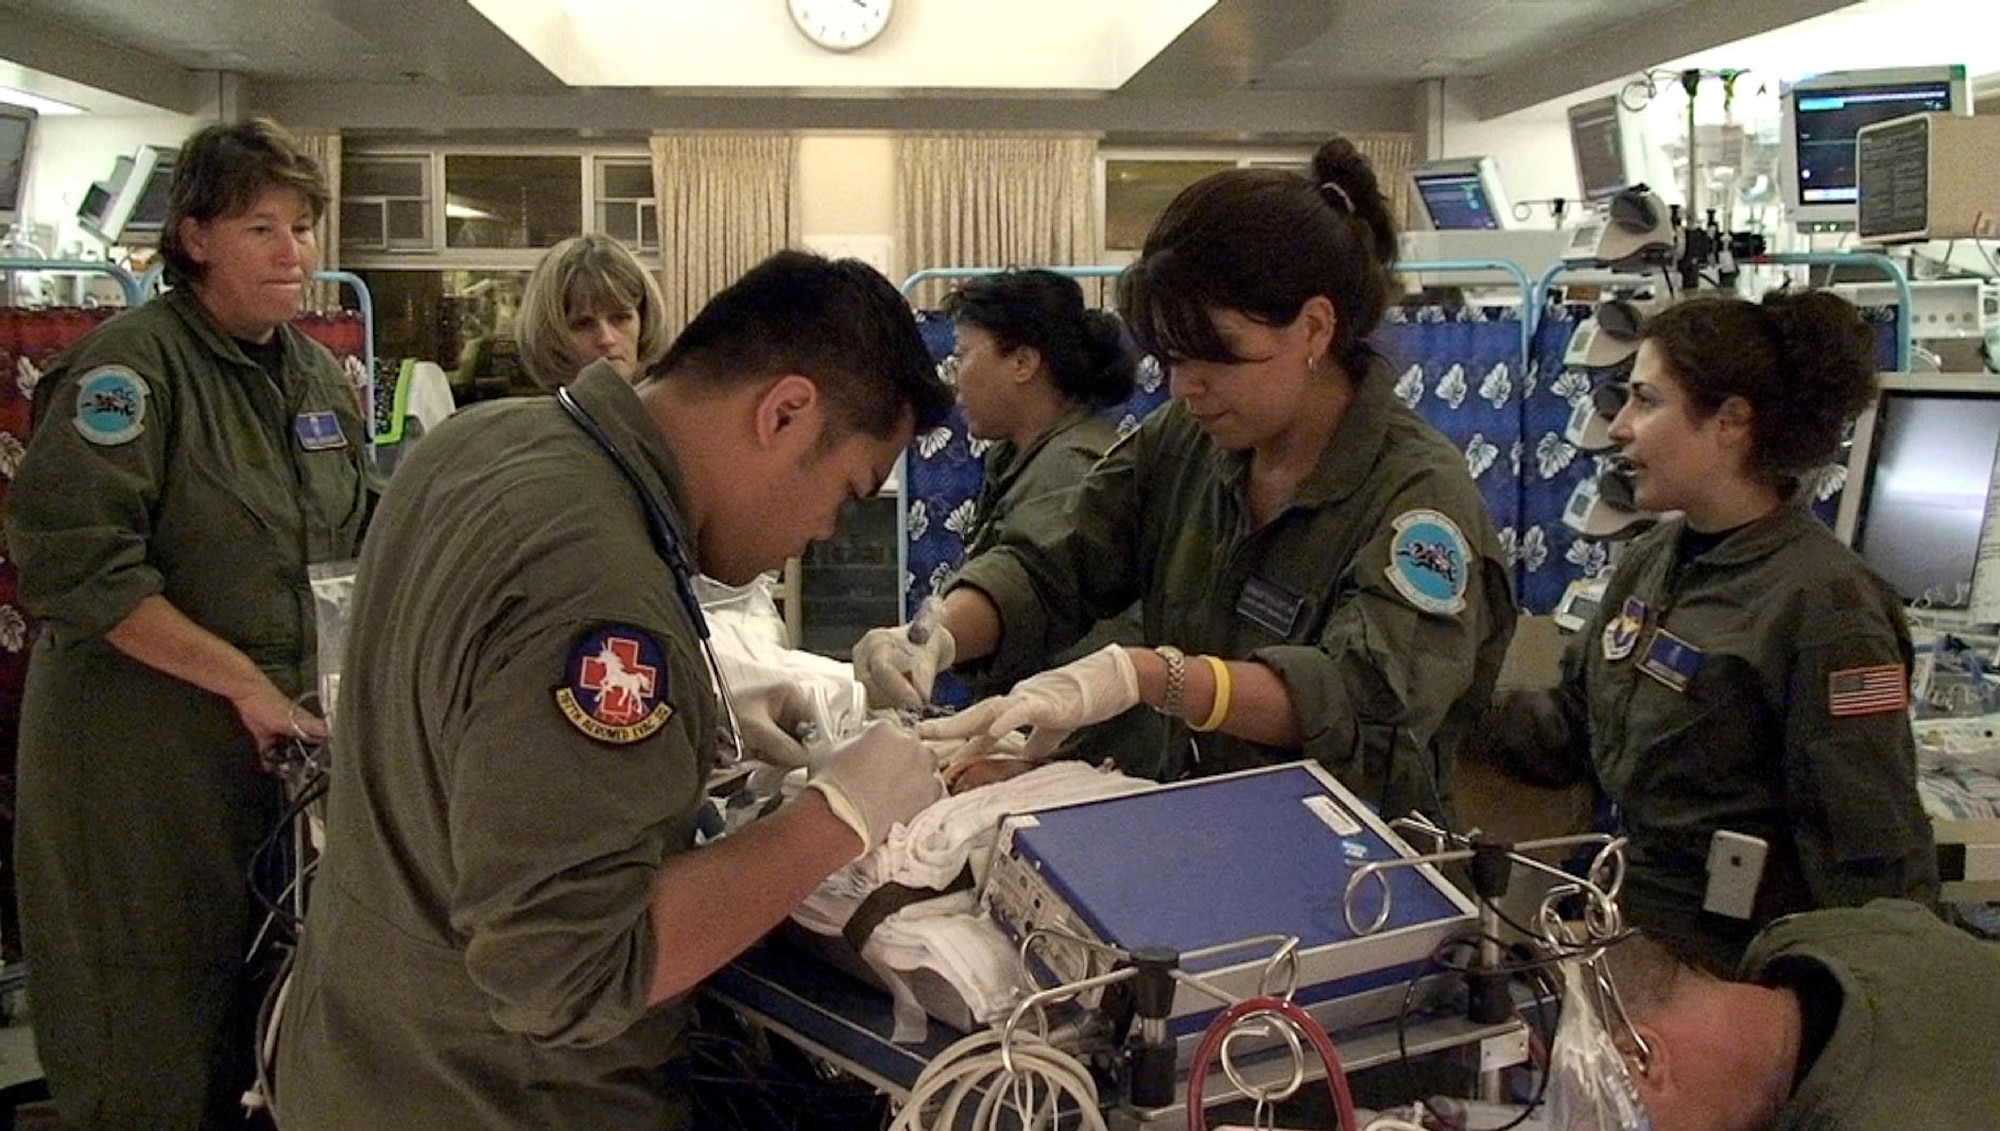 The Wilford Hall Medical Center's extra corporeal membrane oxygenation team stabilizes the infant on the ECMO transport cart in the neonatal intensive care unit at Kapiolani Medical Center in Honolulu July 22. The ECMO team flew to Hawaii to transport the critically ill infant to Rady Children's Hospital in California for advanced medical treatment. Left to right, NICU Respiratory Therapist Airman 1st Class Andrew Pamintuan, 59th Medical Operations Squadron, senior ECMO coordinator Cheryl Collicott, 59th Medical Inpatient Squadron, Neonatal Fellow Capt. (Dr.) Jennifer Pirato, 59th Maternal/Child Care Squadron, Nurses Aida Yumol, Bernadette Elliott, 59th MDIS, Maj. (Dr.) Melissa Tyree, 59th MCCS, Nurse Capt. Terry Bailey, 59th MDIS. (U.S. Air Force photo/Maj. Kreangkai Tyree)